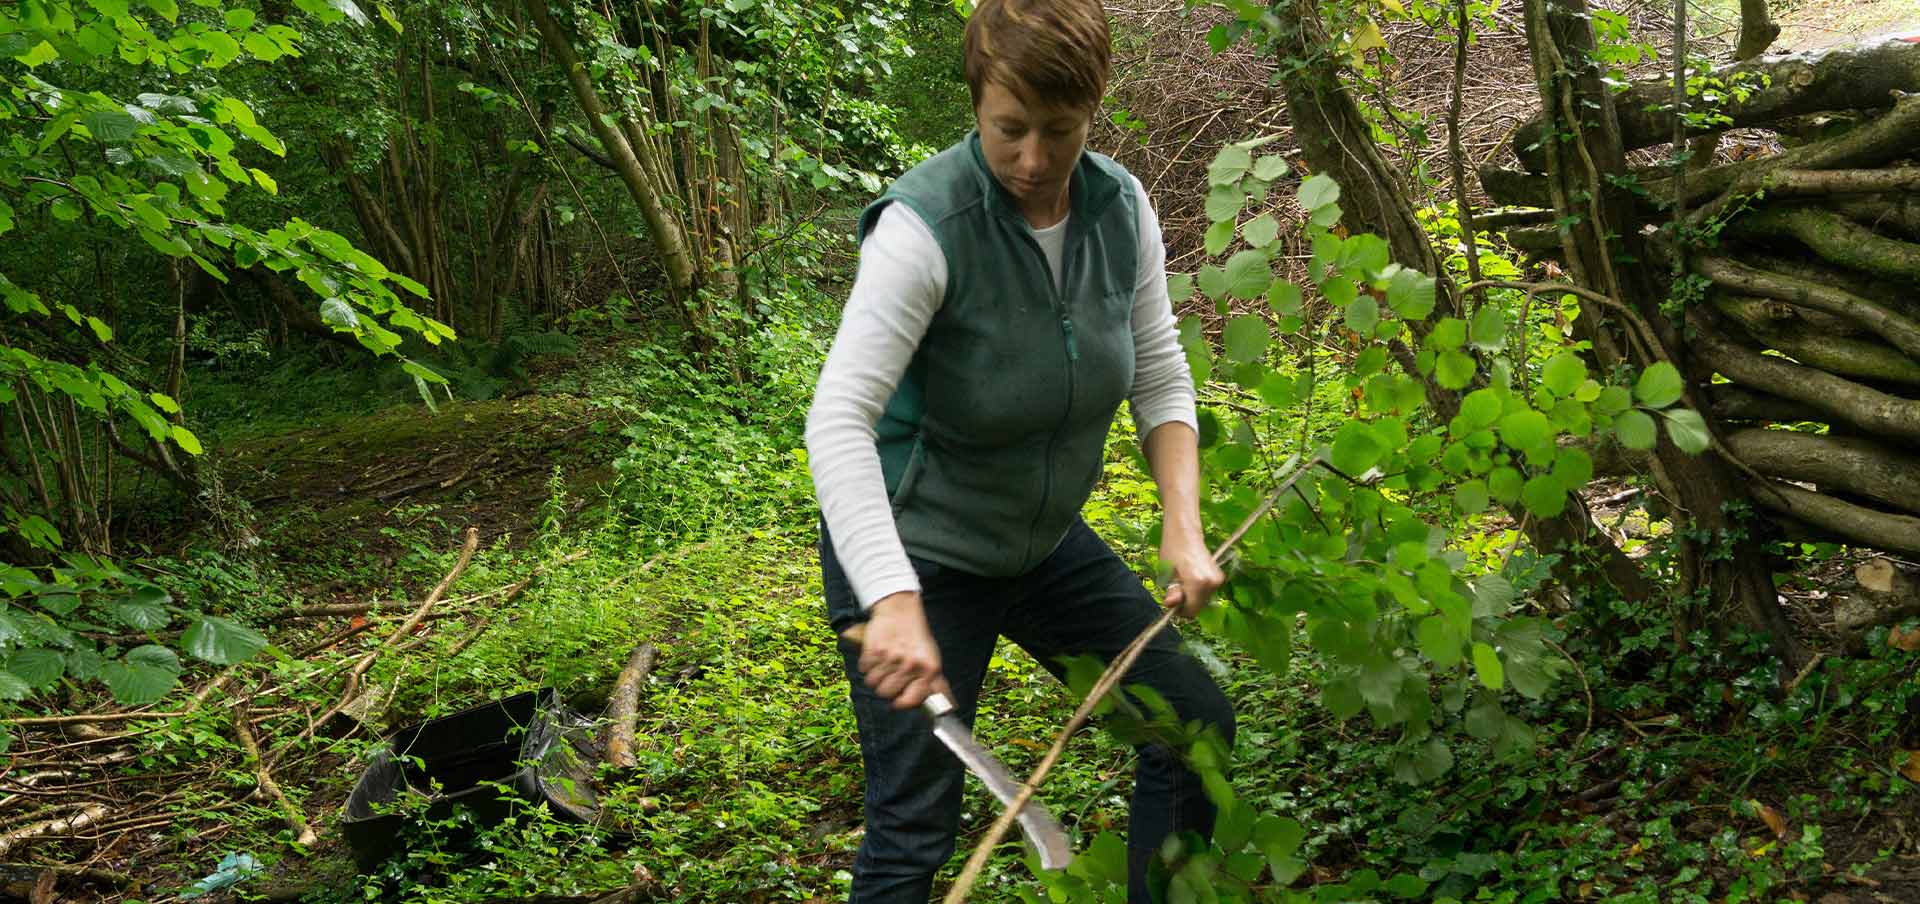 Lisa Standley working in the forest